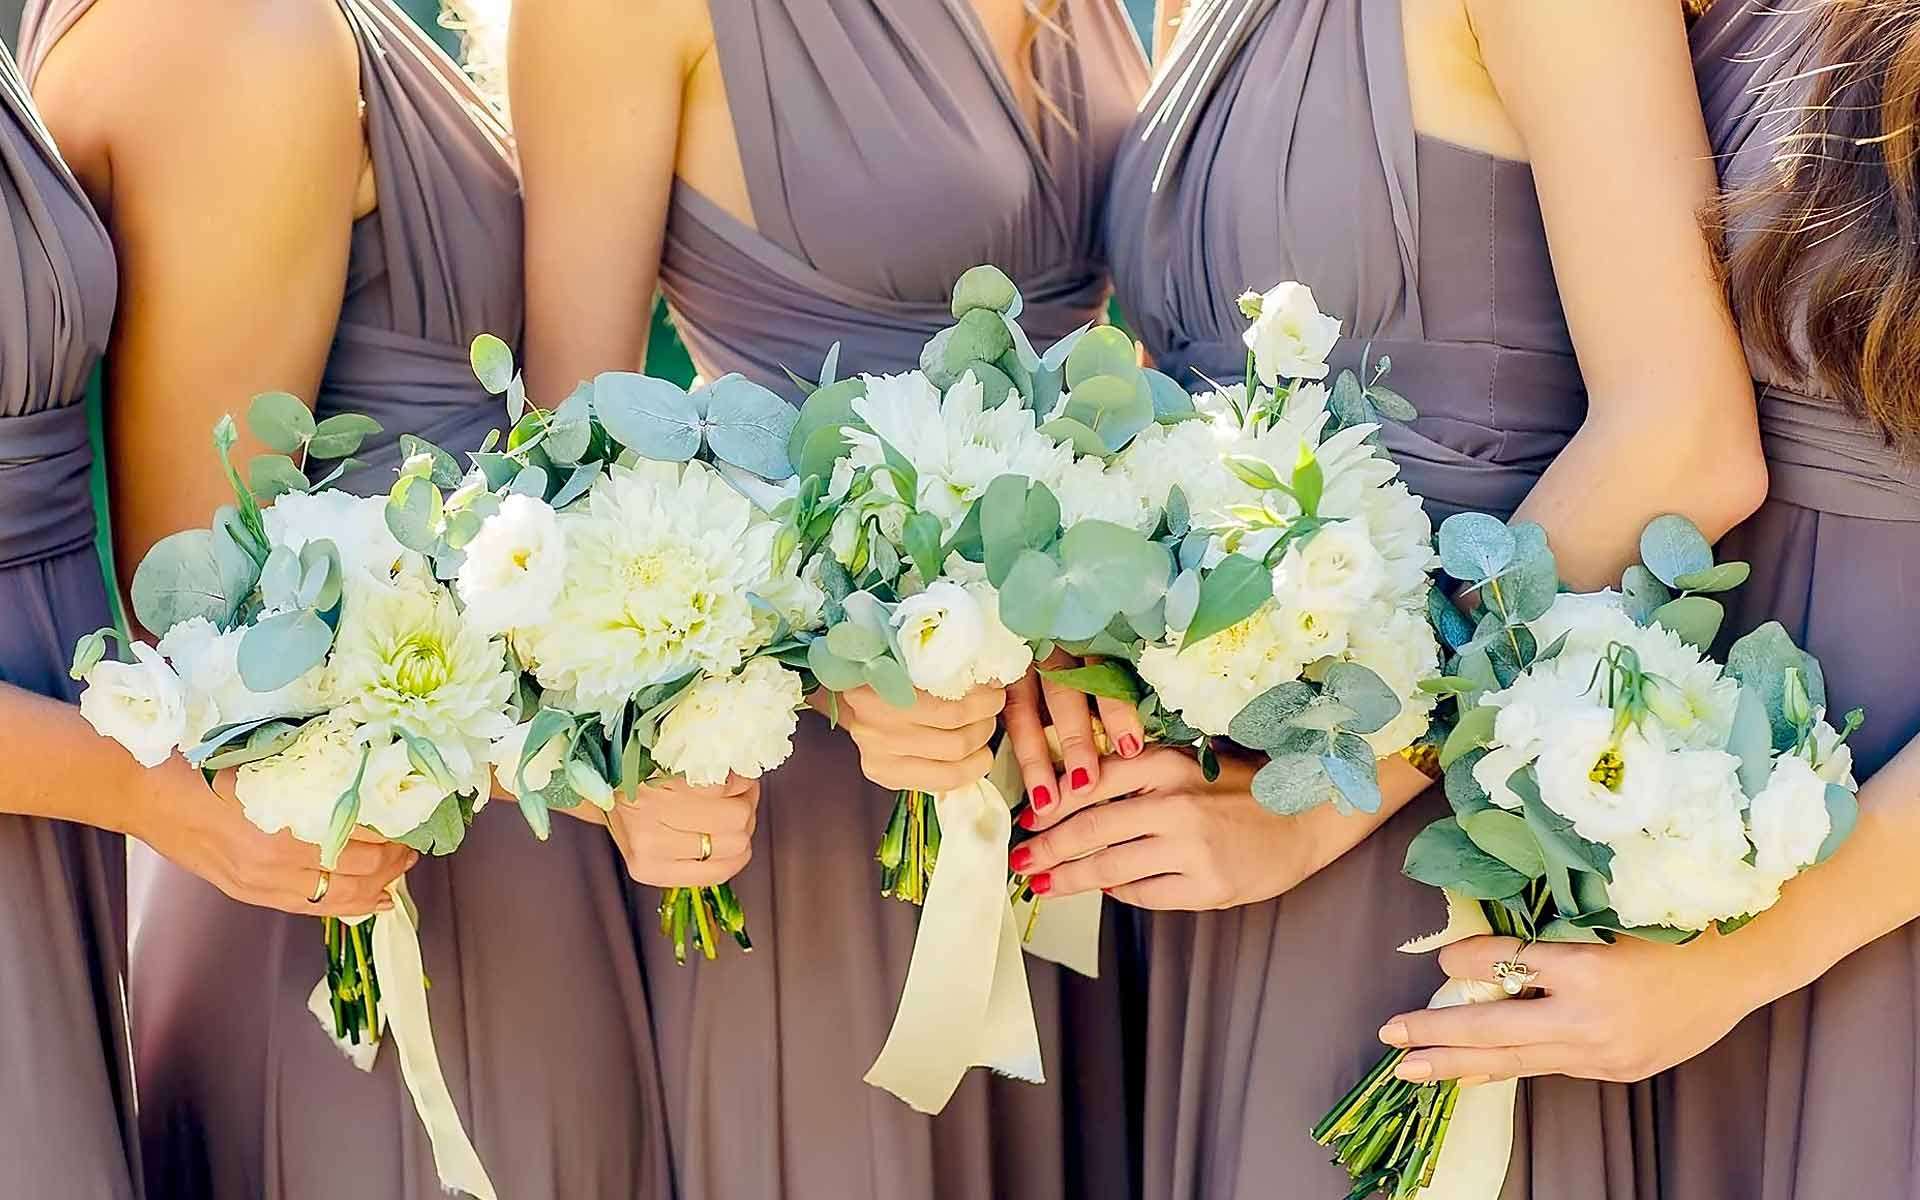 Popping-Pastel-Green-Leaves-Give-Character-To-These-Simple-White-Bouquets